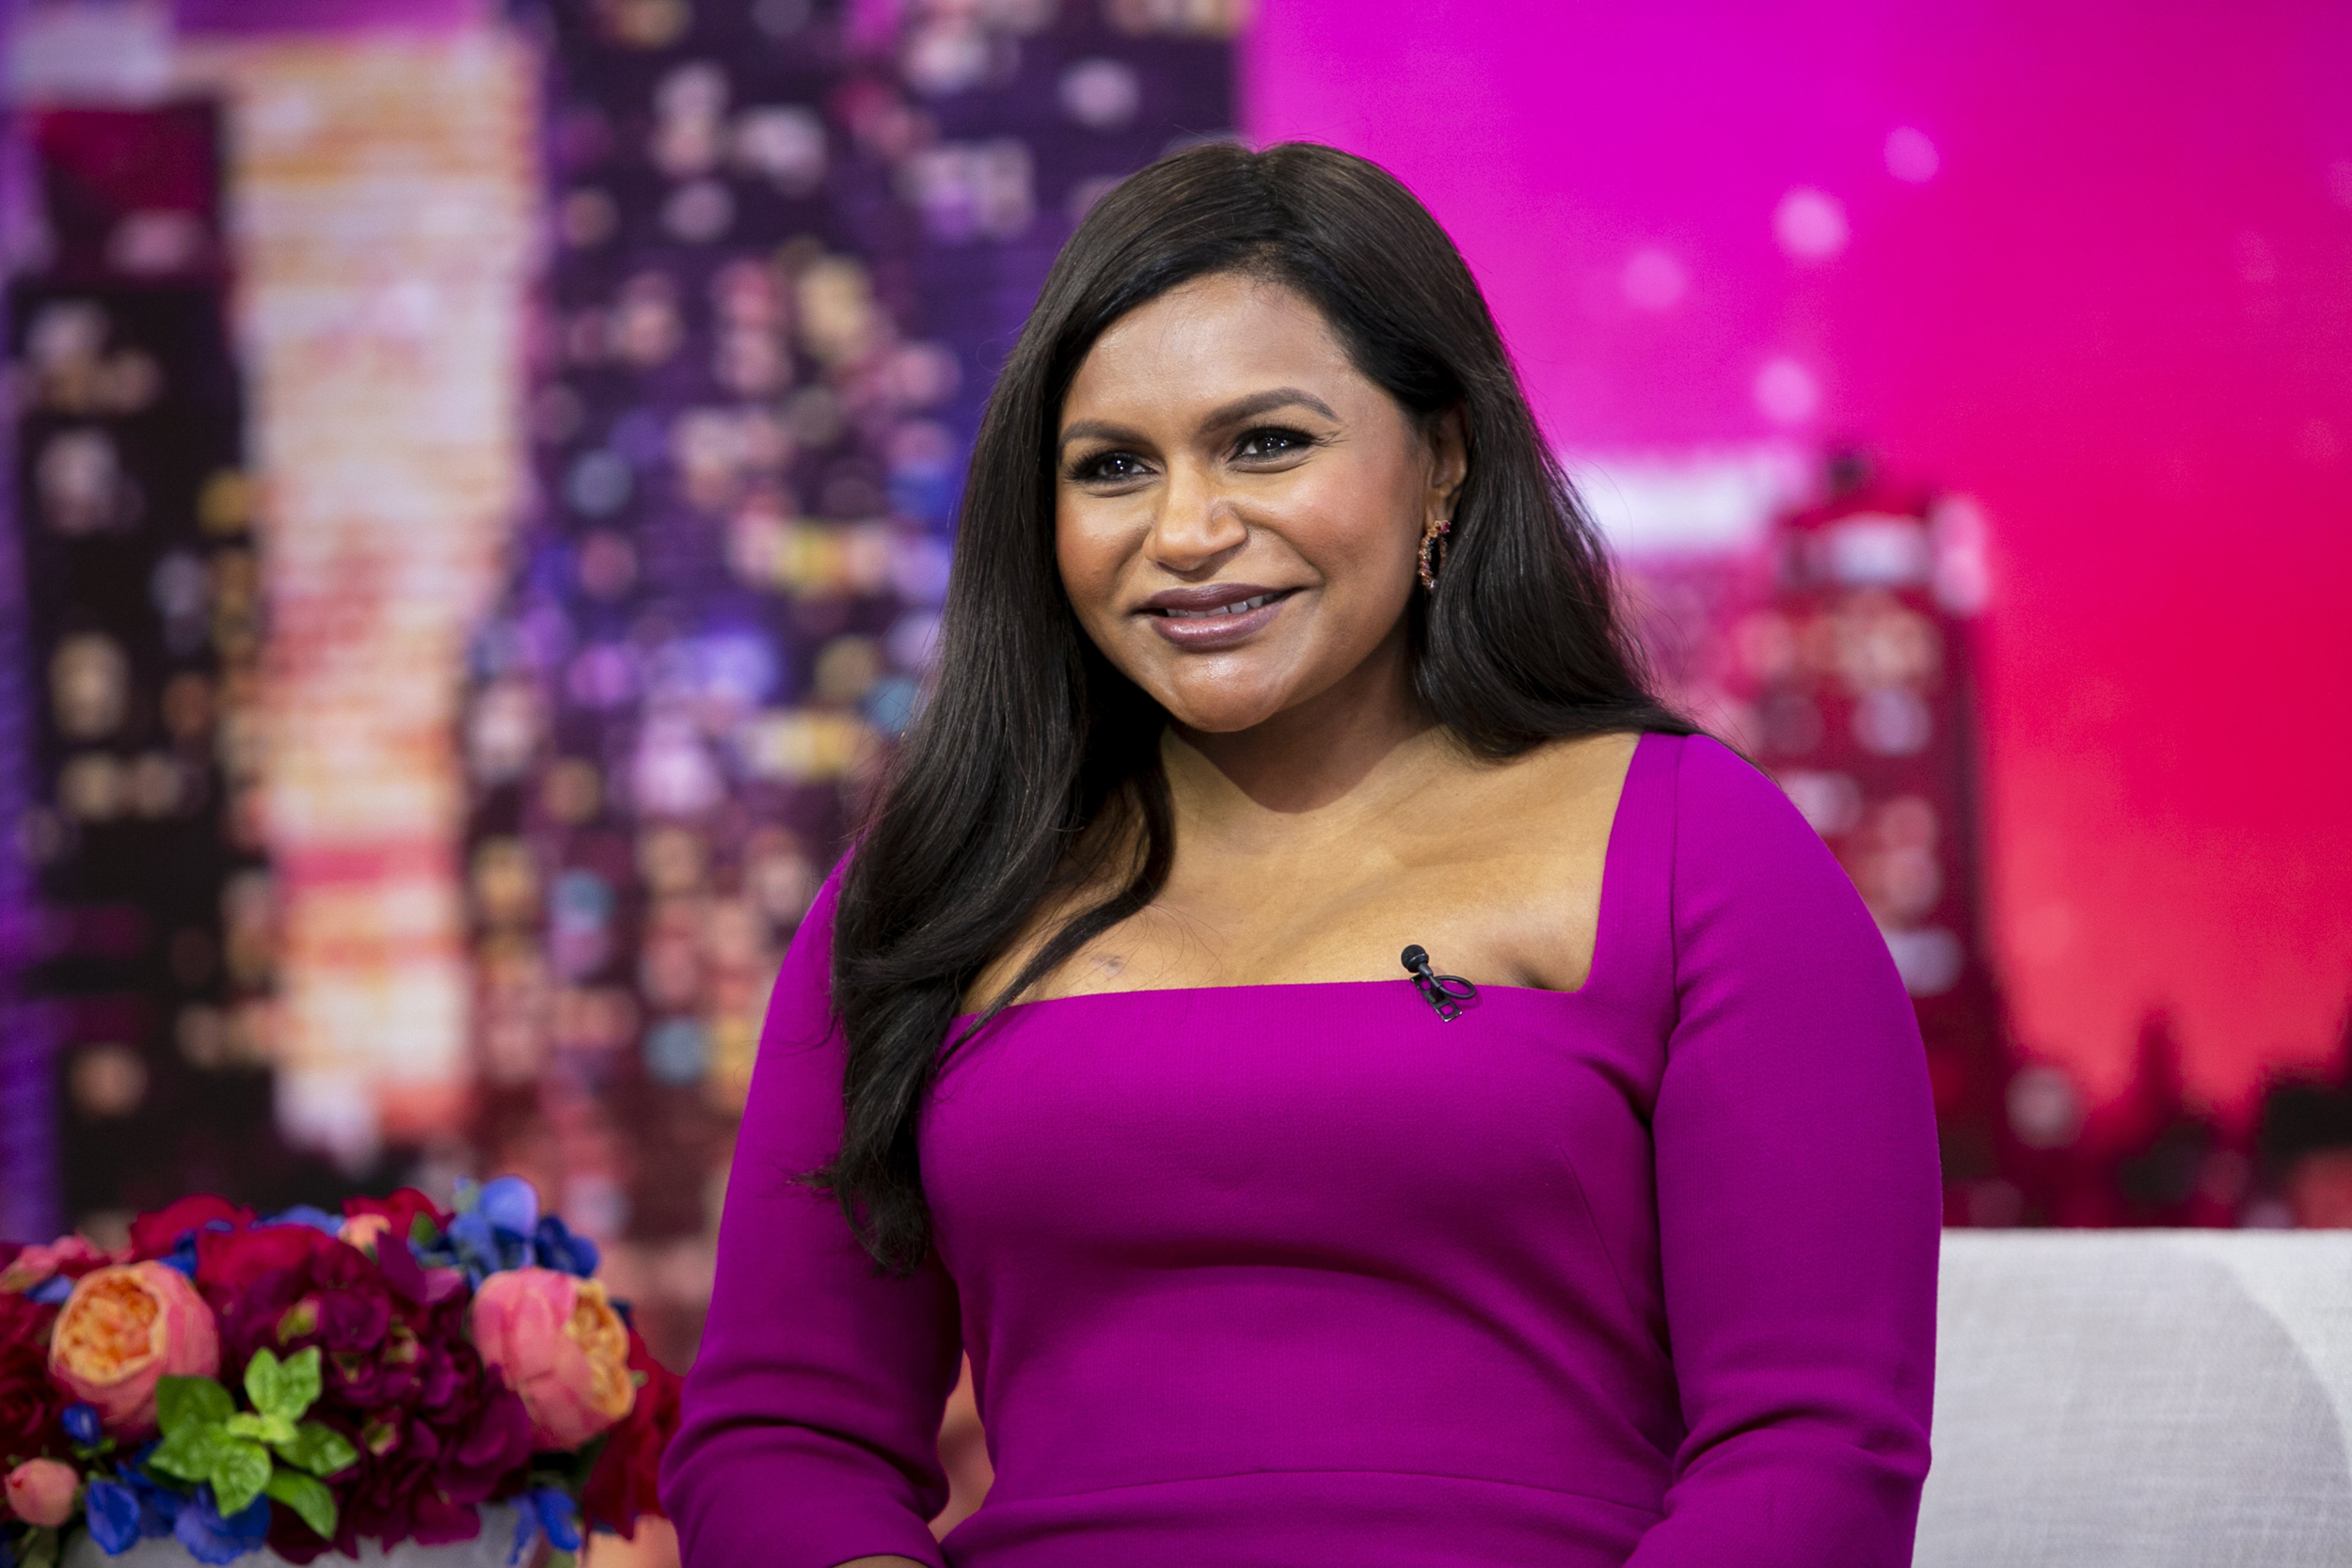 Mindy Kaling Facing Cancel Culture After Accused Of Telling Lies And Kissing Without Permission